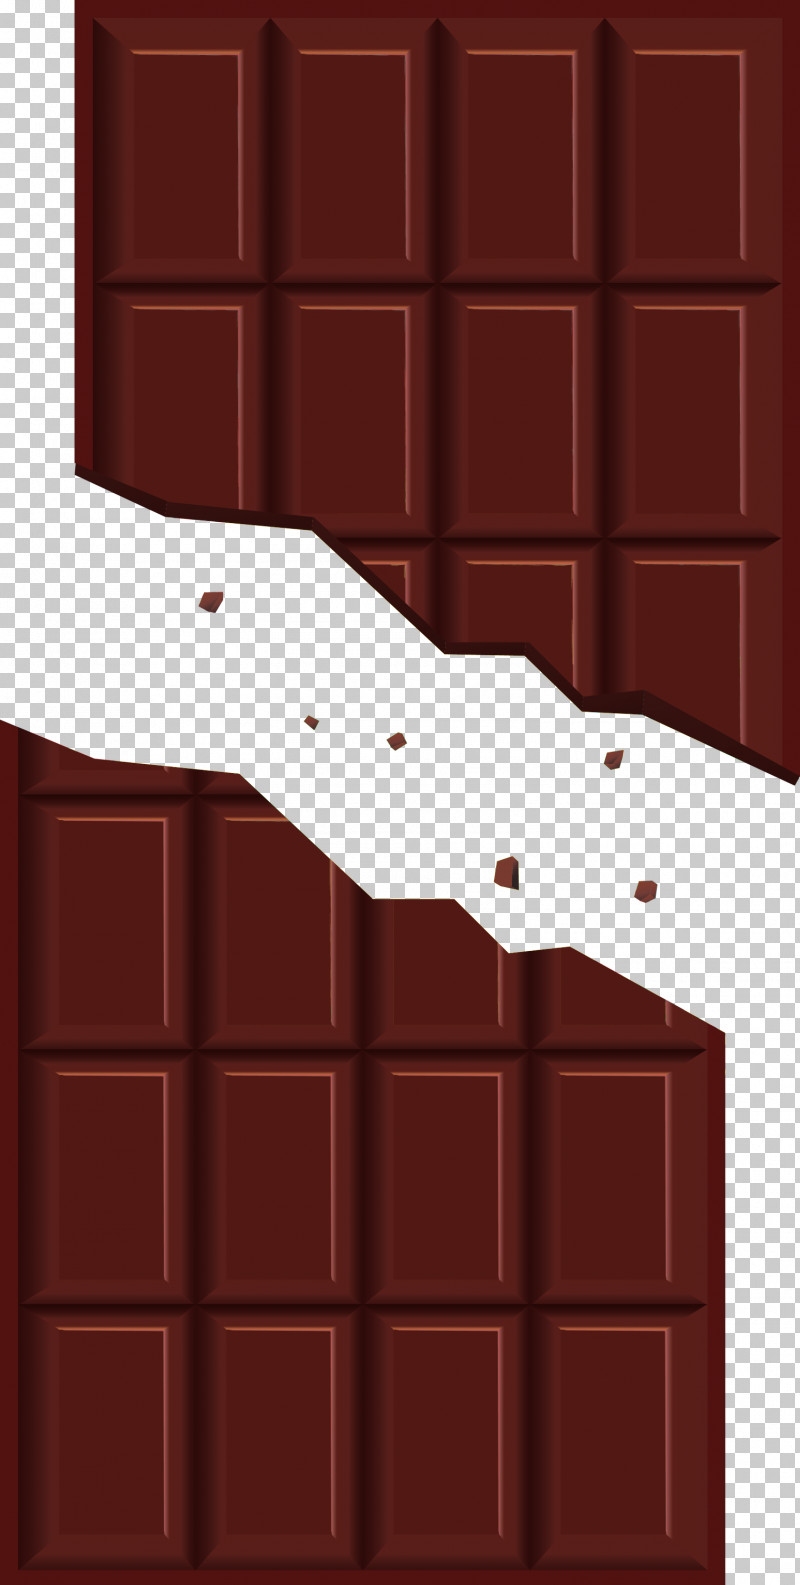 Dark Chocolate Bar Opened Chocolate Bar PNG, Clipart, Architecture, Brick, Brown, Chocolate, Confectionery Free PNG Download